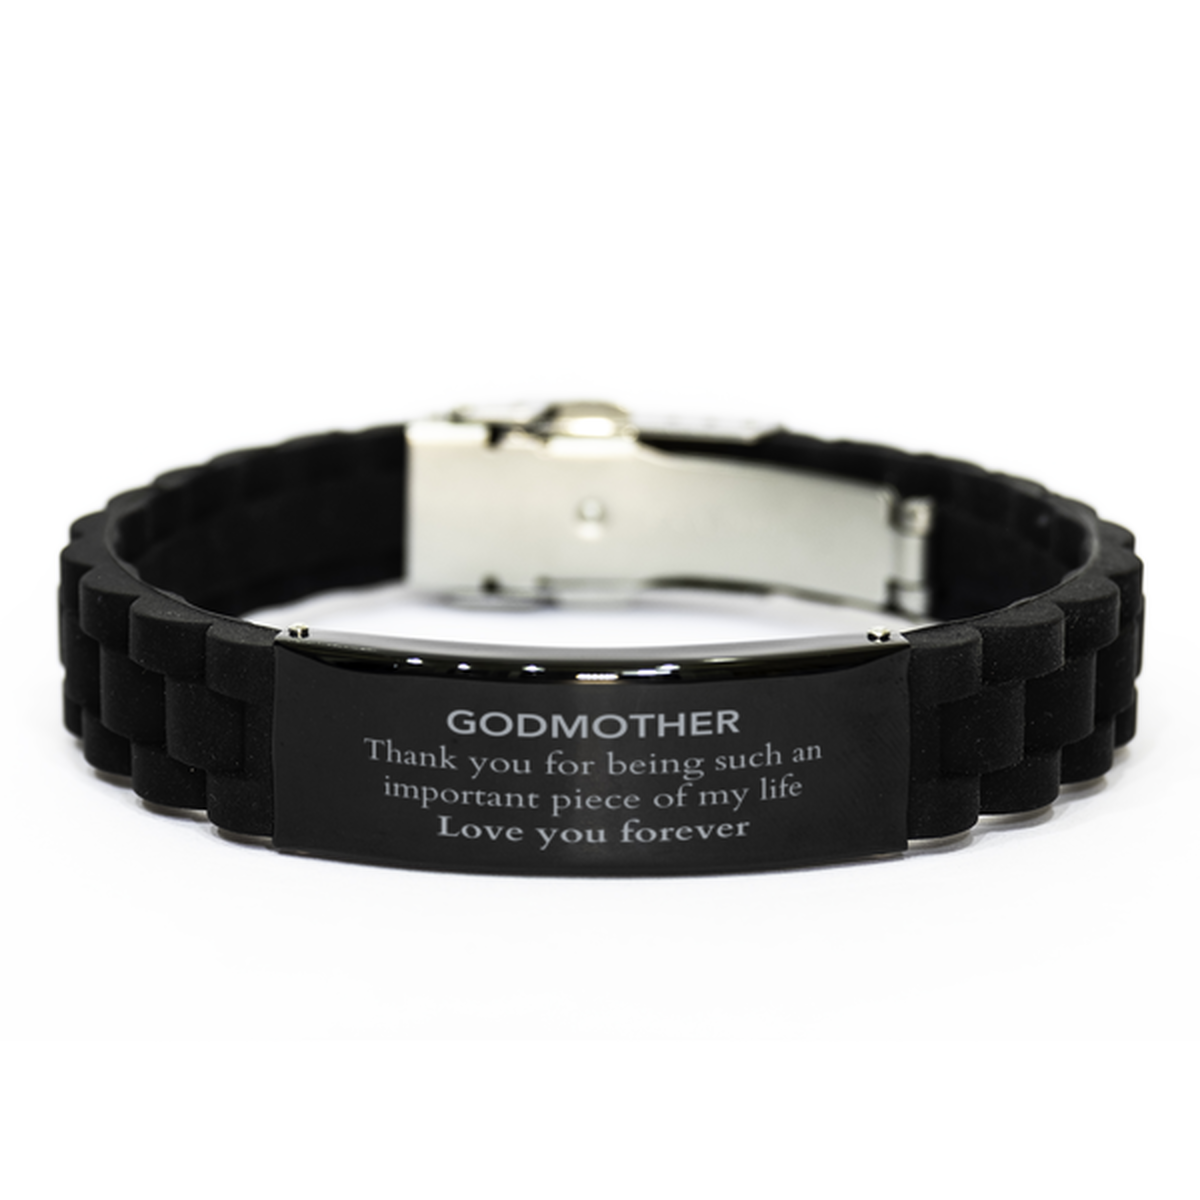 Appropriate Godmother Black Glidelock Clasp Bracelet Epic Birthday Gifts for Godmother Thank you for being such an important piece of my life Godmother Christmas Mothers Fathers Day